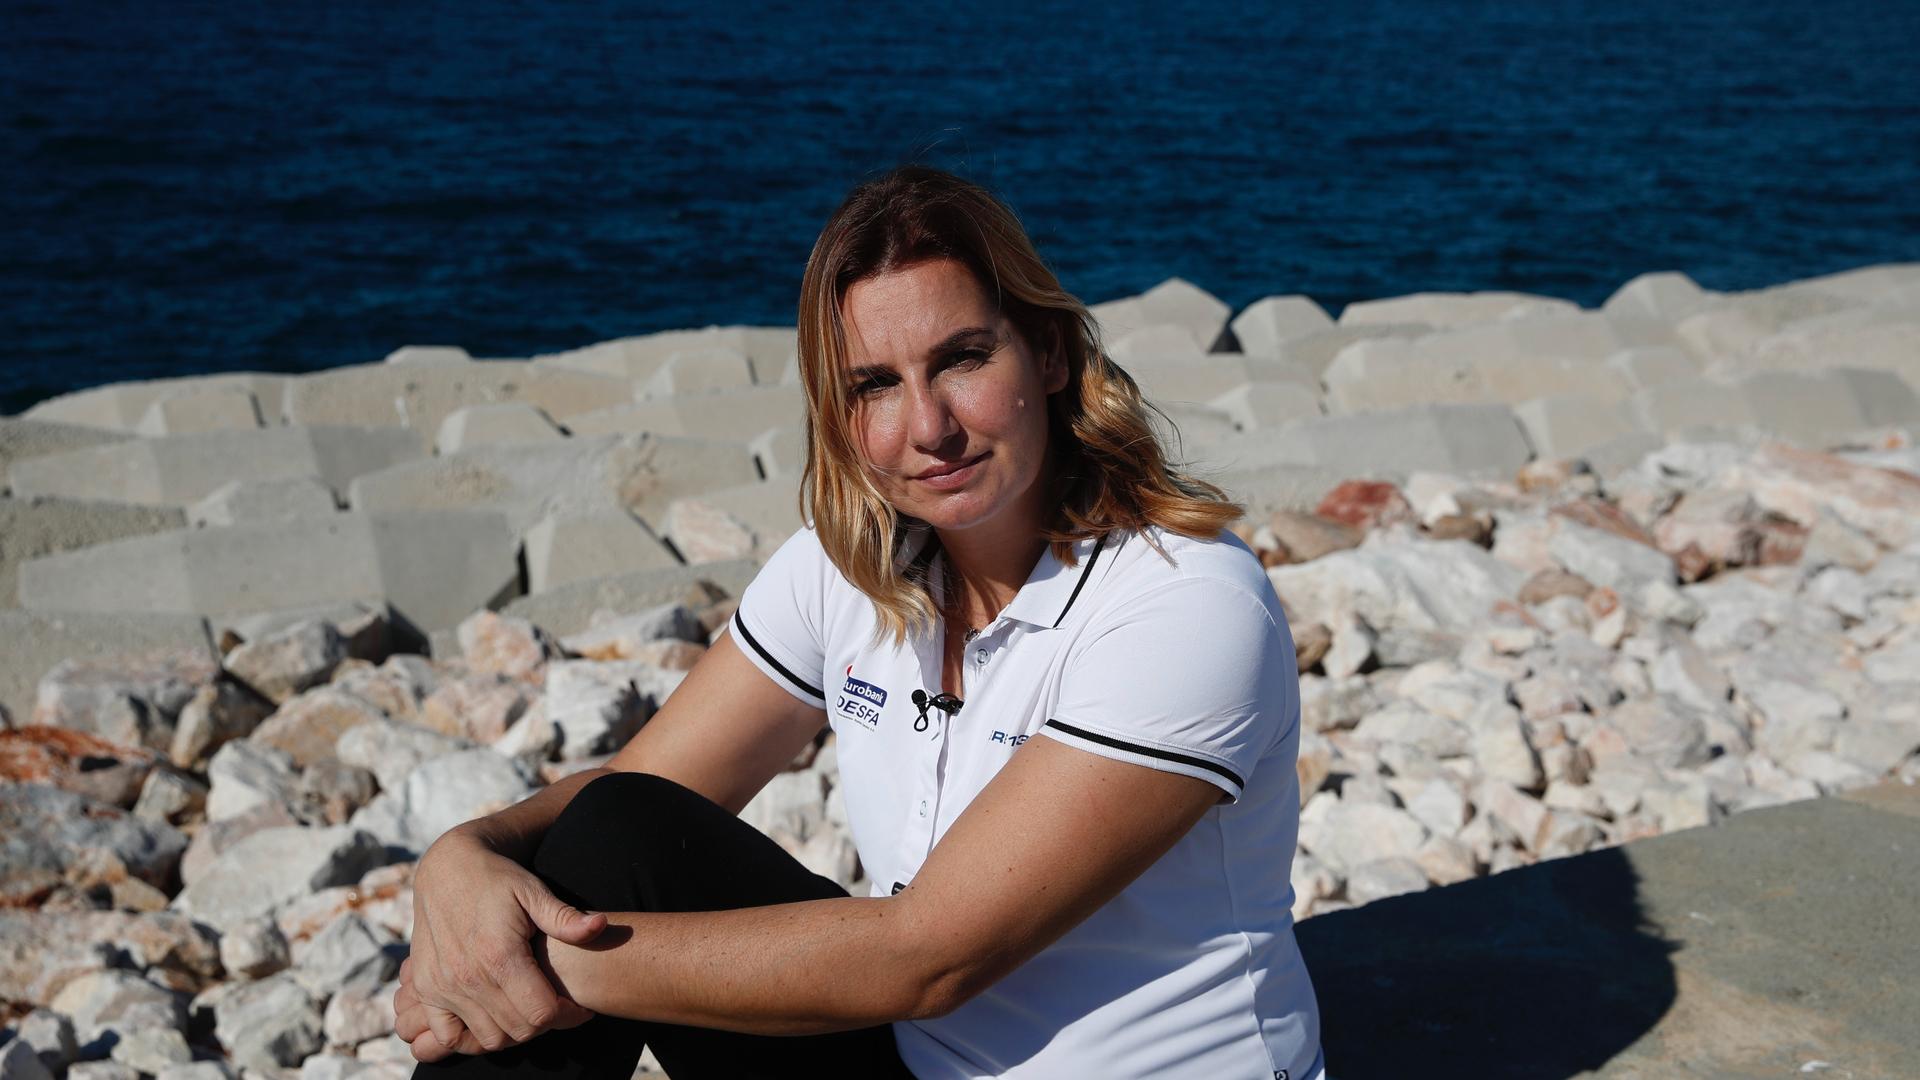 Greek Olympic sailing champion Sofia Bekatorou poses for a photograph during an interview for The Associated Press, at Agios Kosmas marina in southern Athens, Feb. 4, 2021. Bekatorou is the most successful female athlete in Greek sporting history who rece